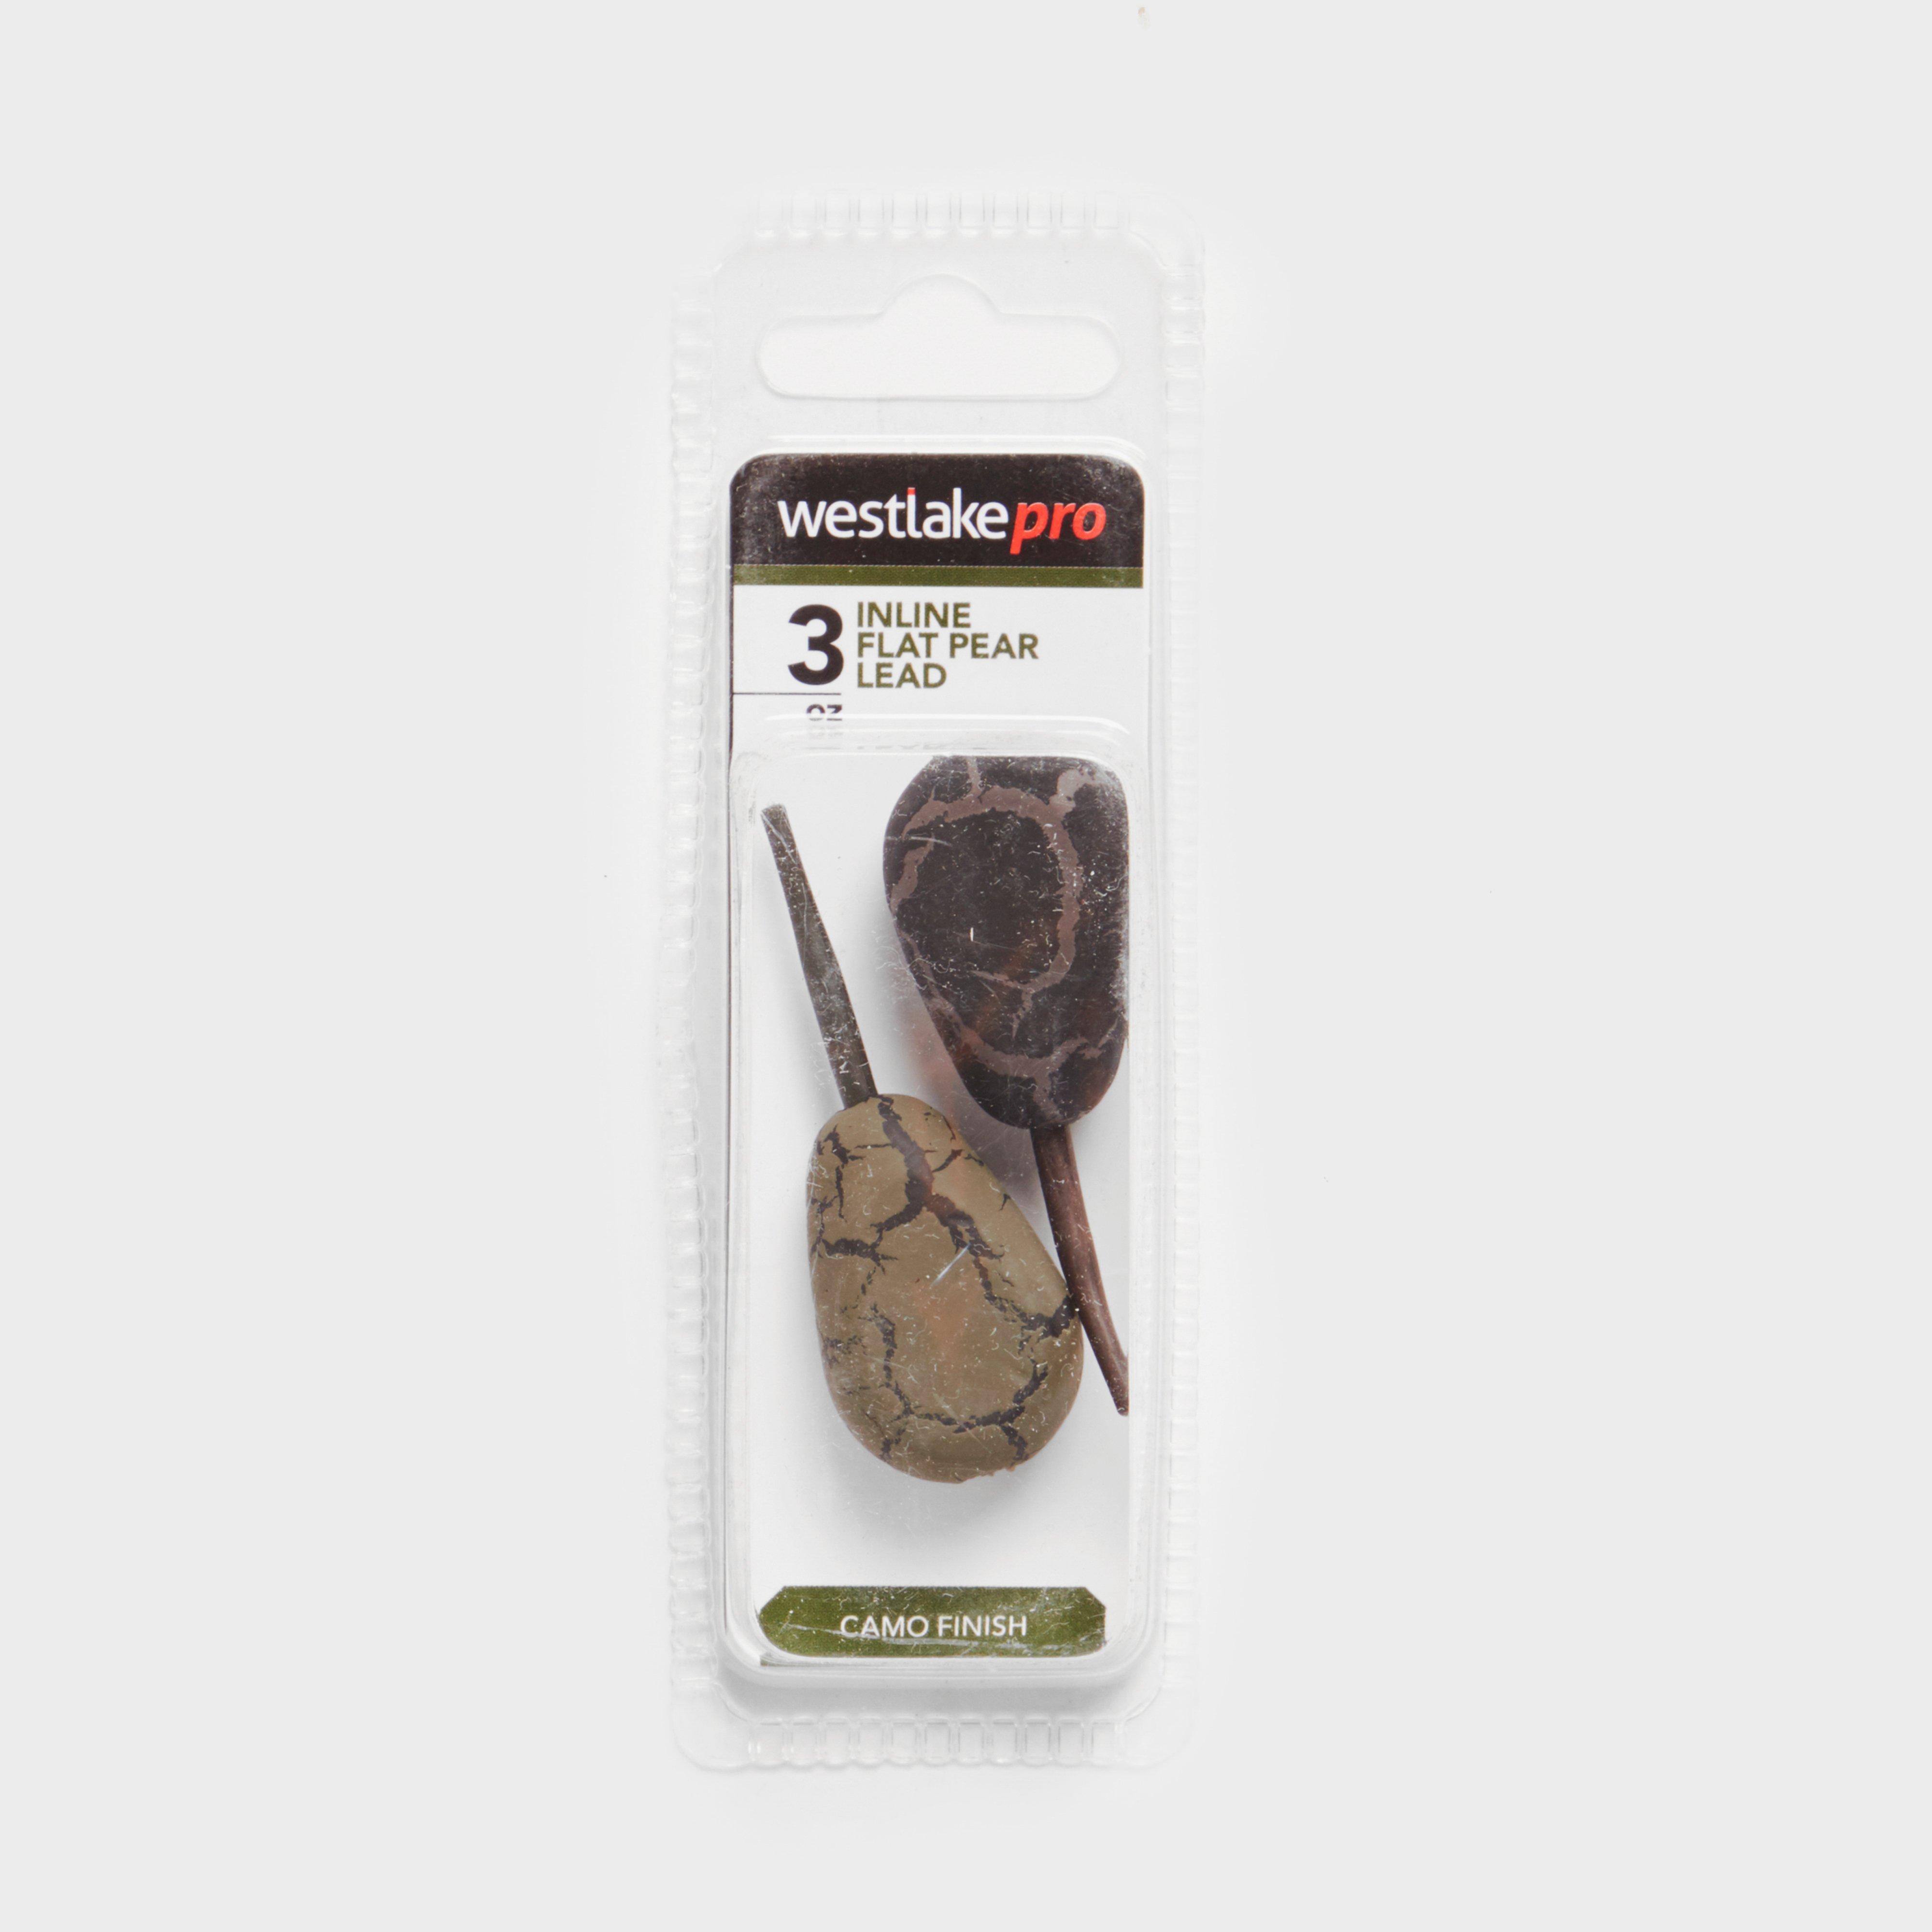 Photos - Other for Fishing West Lake Inline Flat Pear Lead 3oz, Brown 